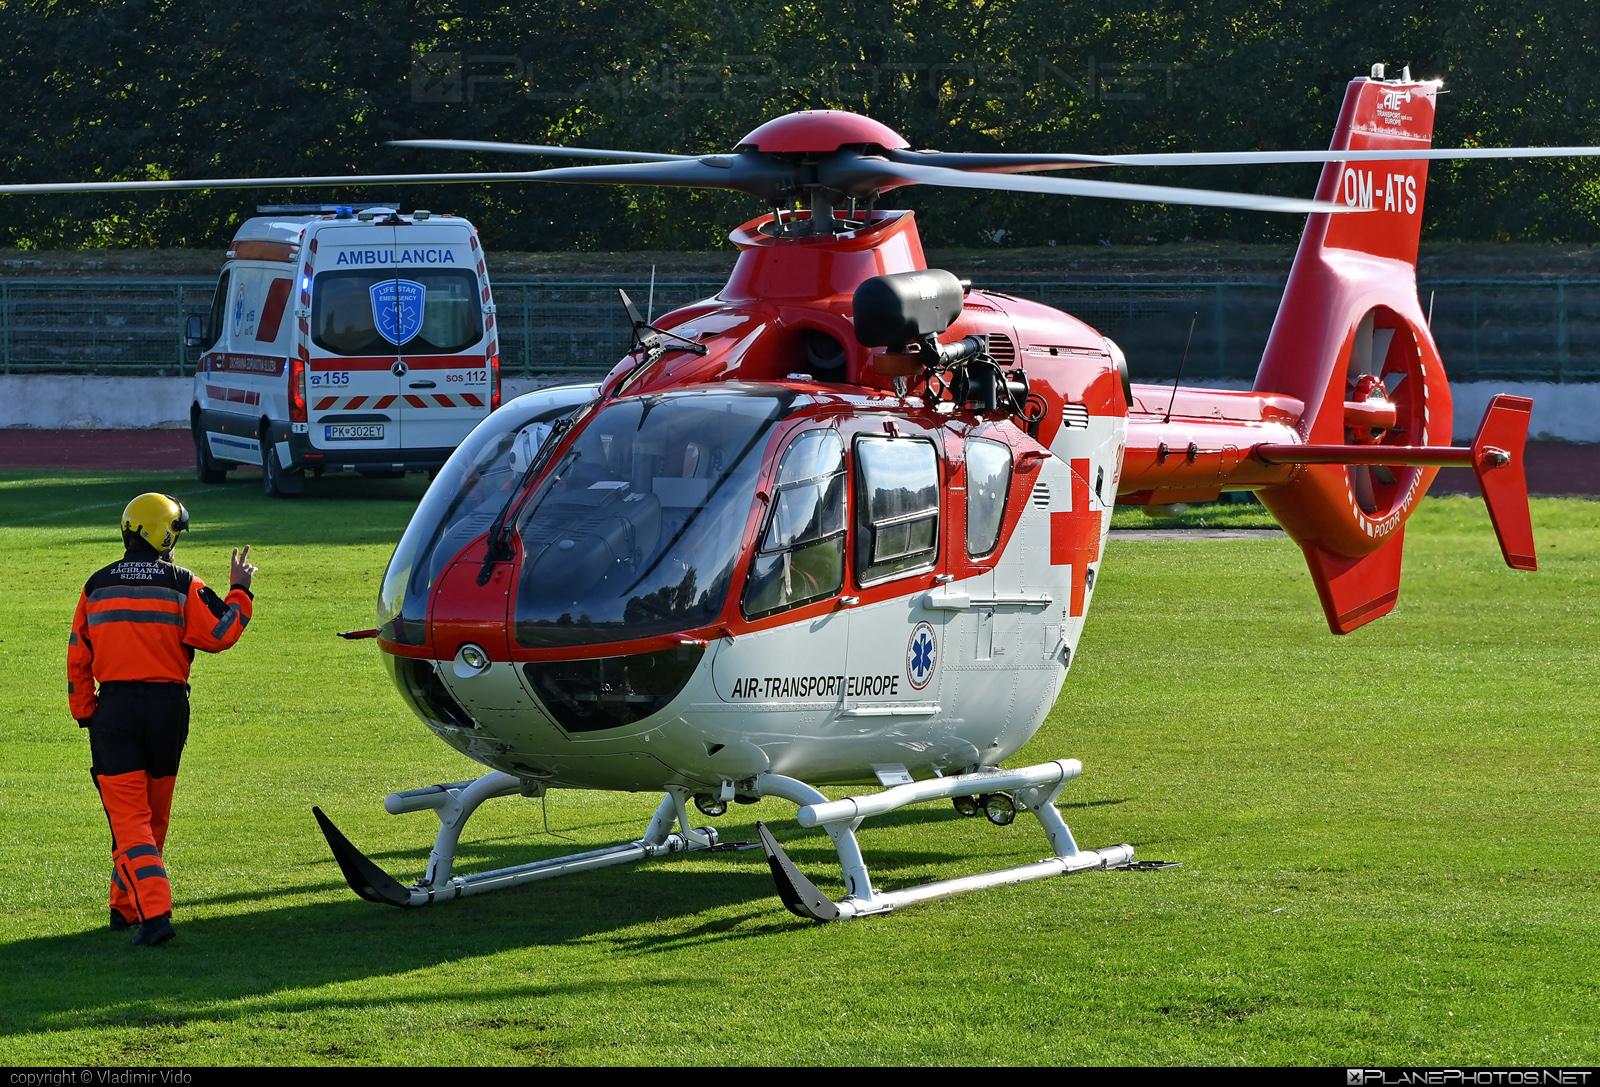 Eurocopter EC135 P2+ - OM-ATS operated by Air Transport Europe #airtransporteurope #ec135 #ec135p2 #ec135p2plus #eurocopter